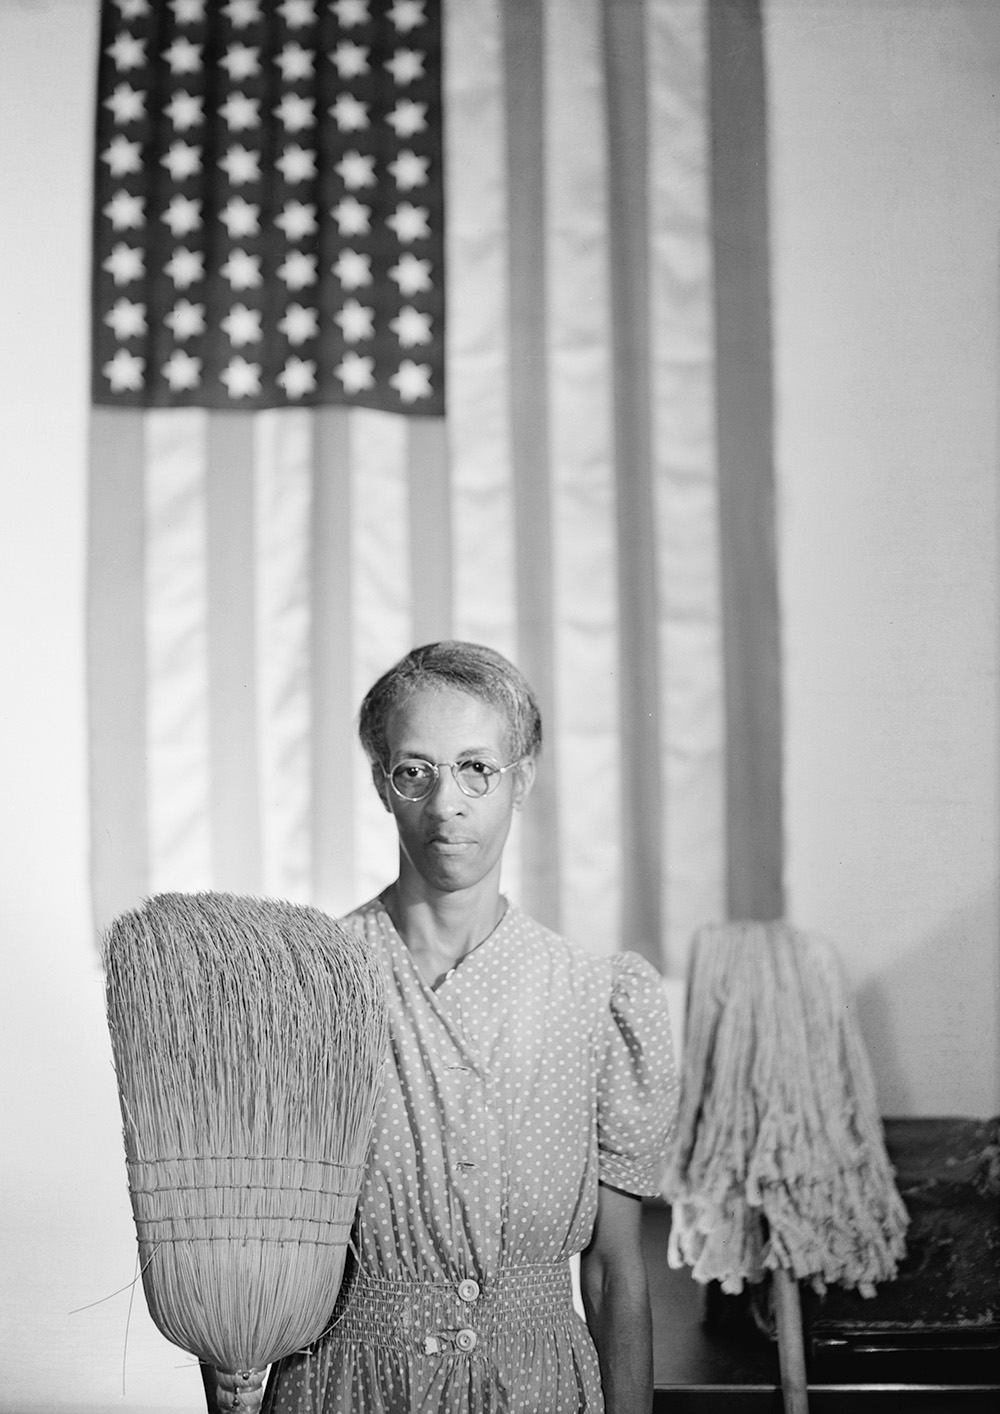 A person with dark skin standing in front of the American flag, holding a broom and a mop.